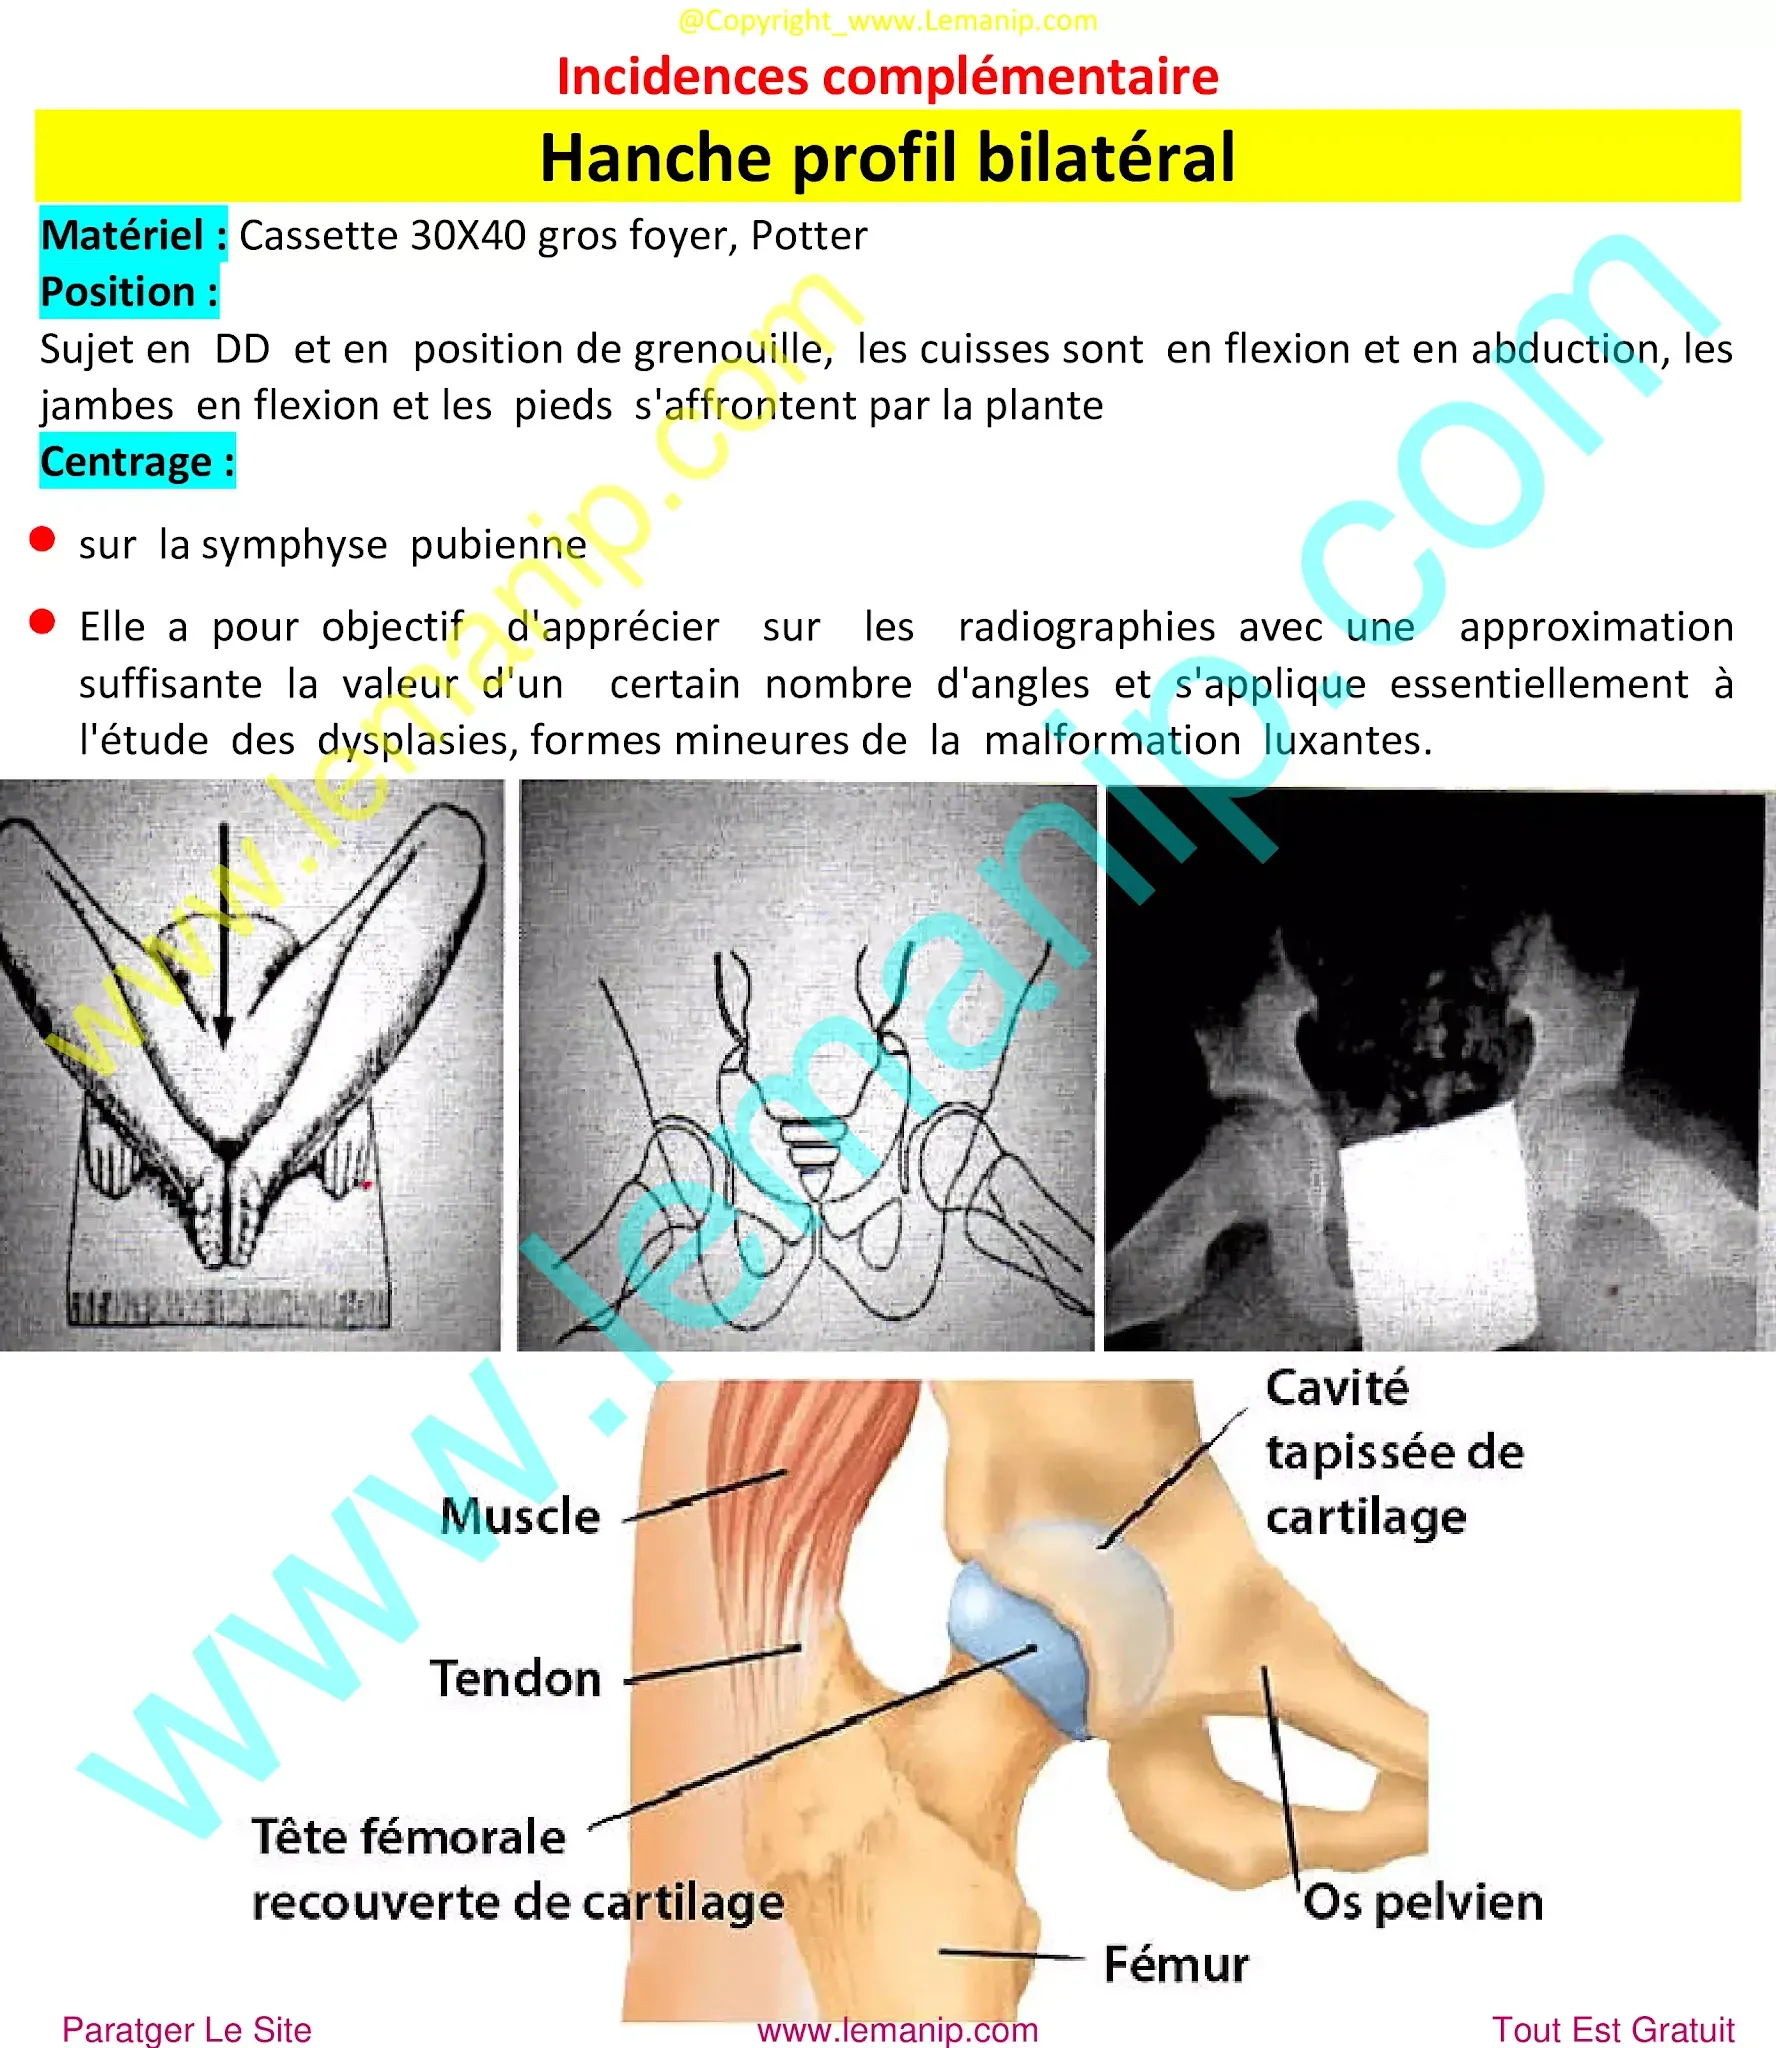 sacrococcygeal joint,pvns,pelvic floor mri,popping hip joint,posterior hip replacement,hip ligaments,rheumatoid,chirurgie hanche clinique privée,douleur hanche et cuisse,chirurgie hanche